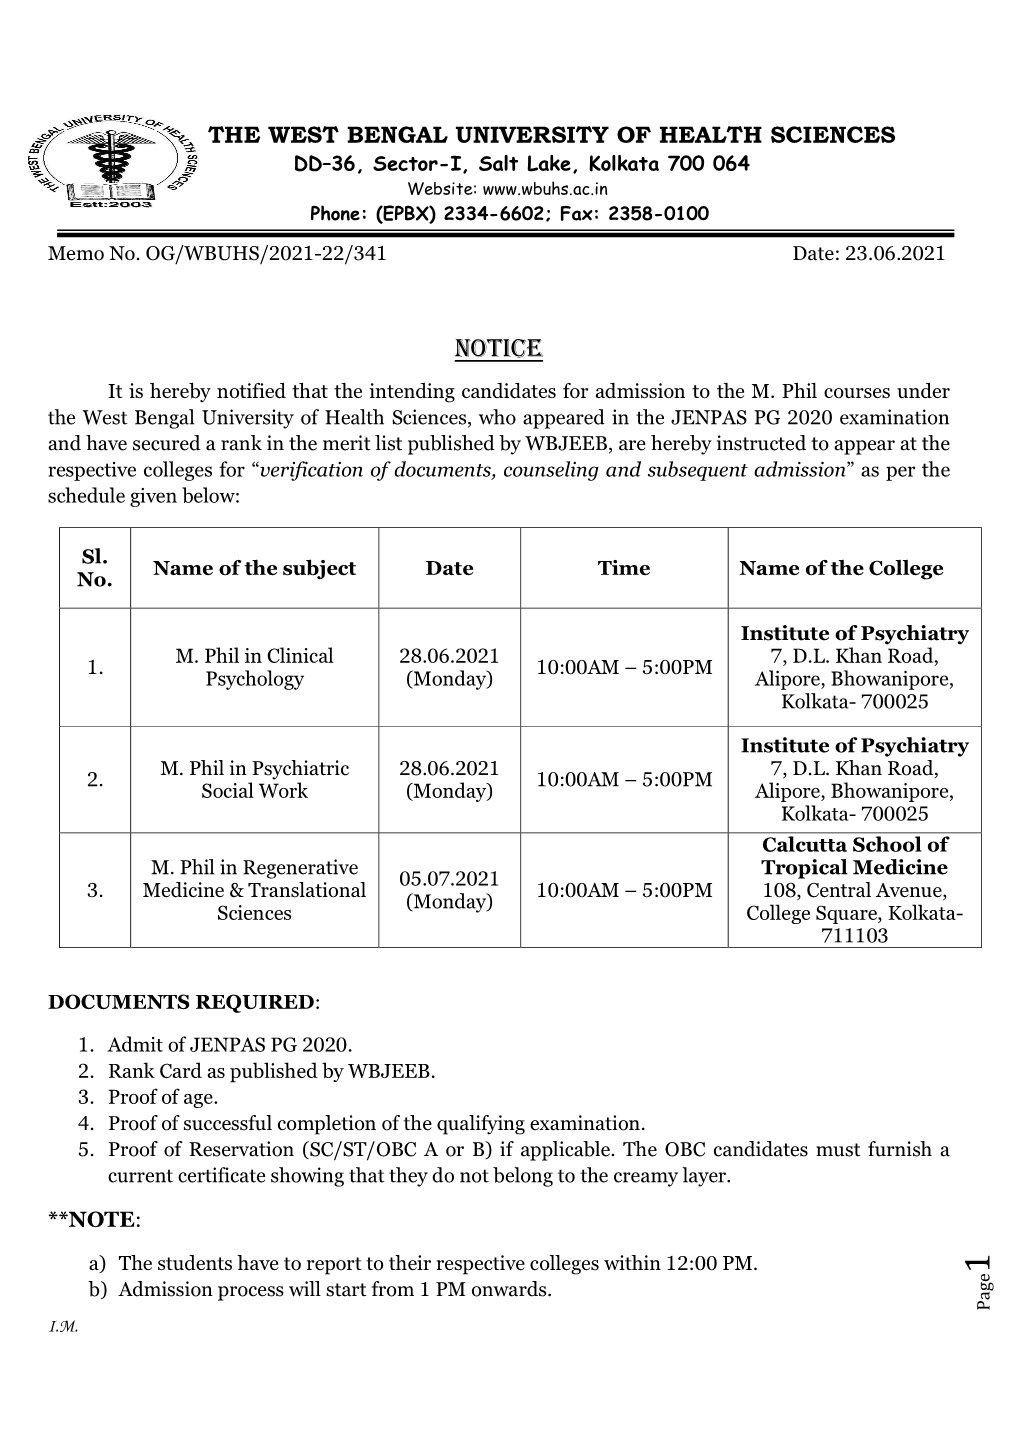 Notice Regarding Intending Candidates for Admission to the M. Phil Courses Under The